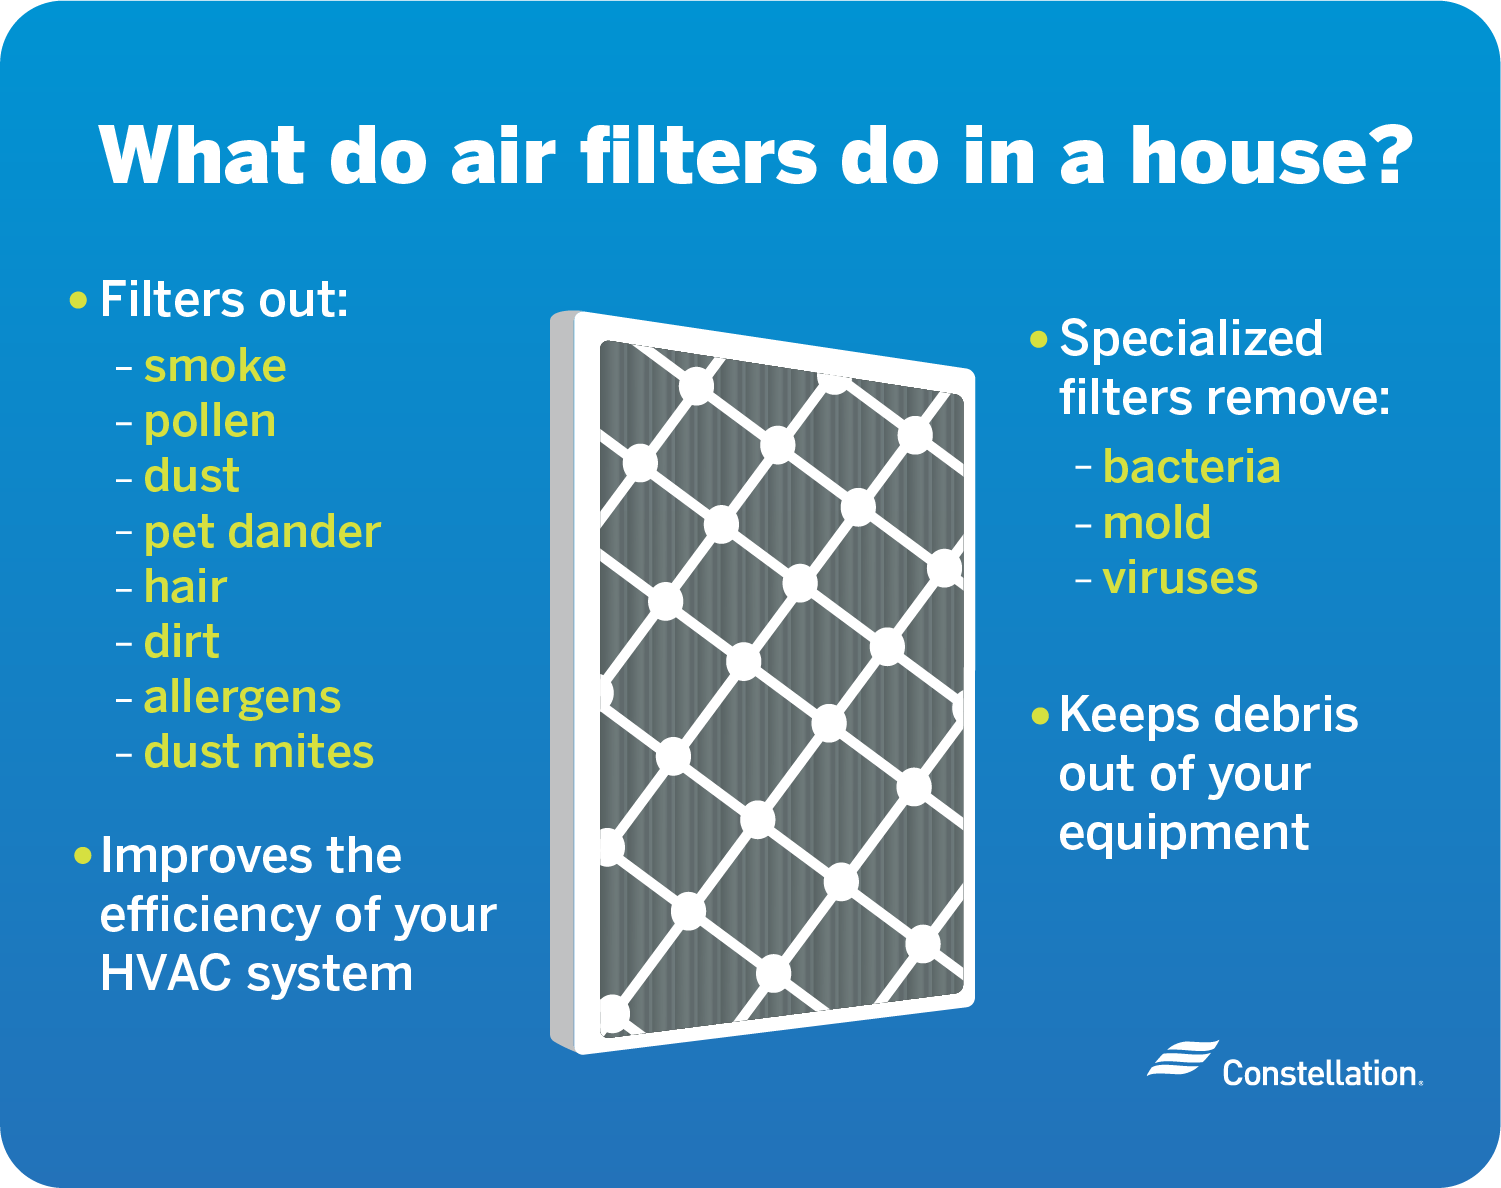 What does an air filter do in a house?